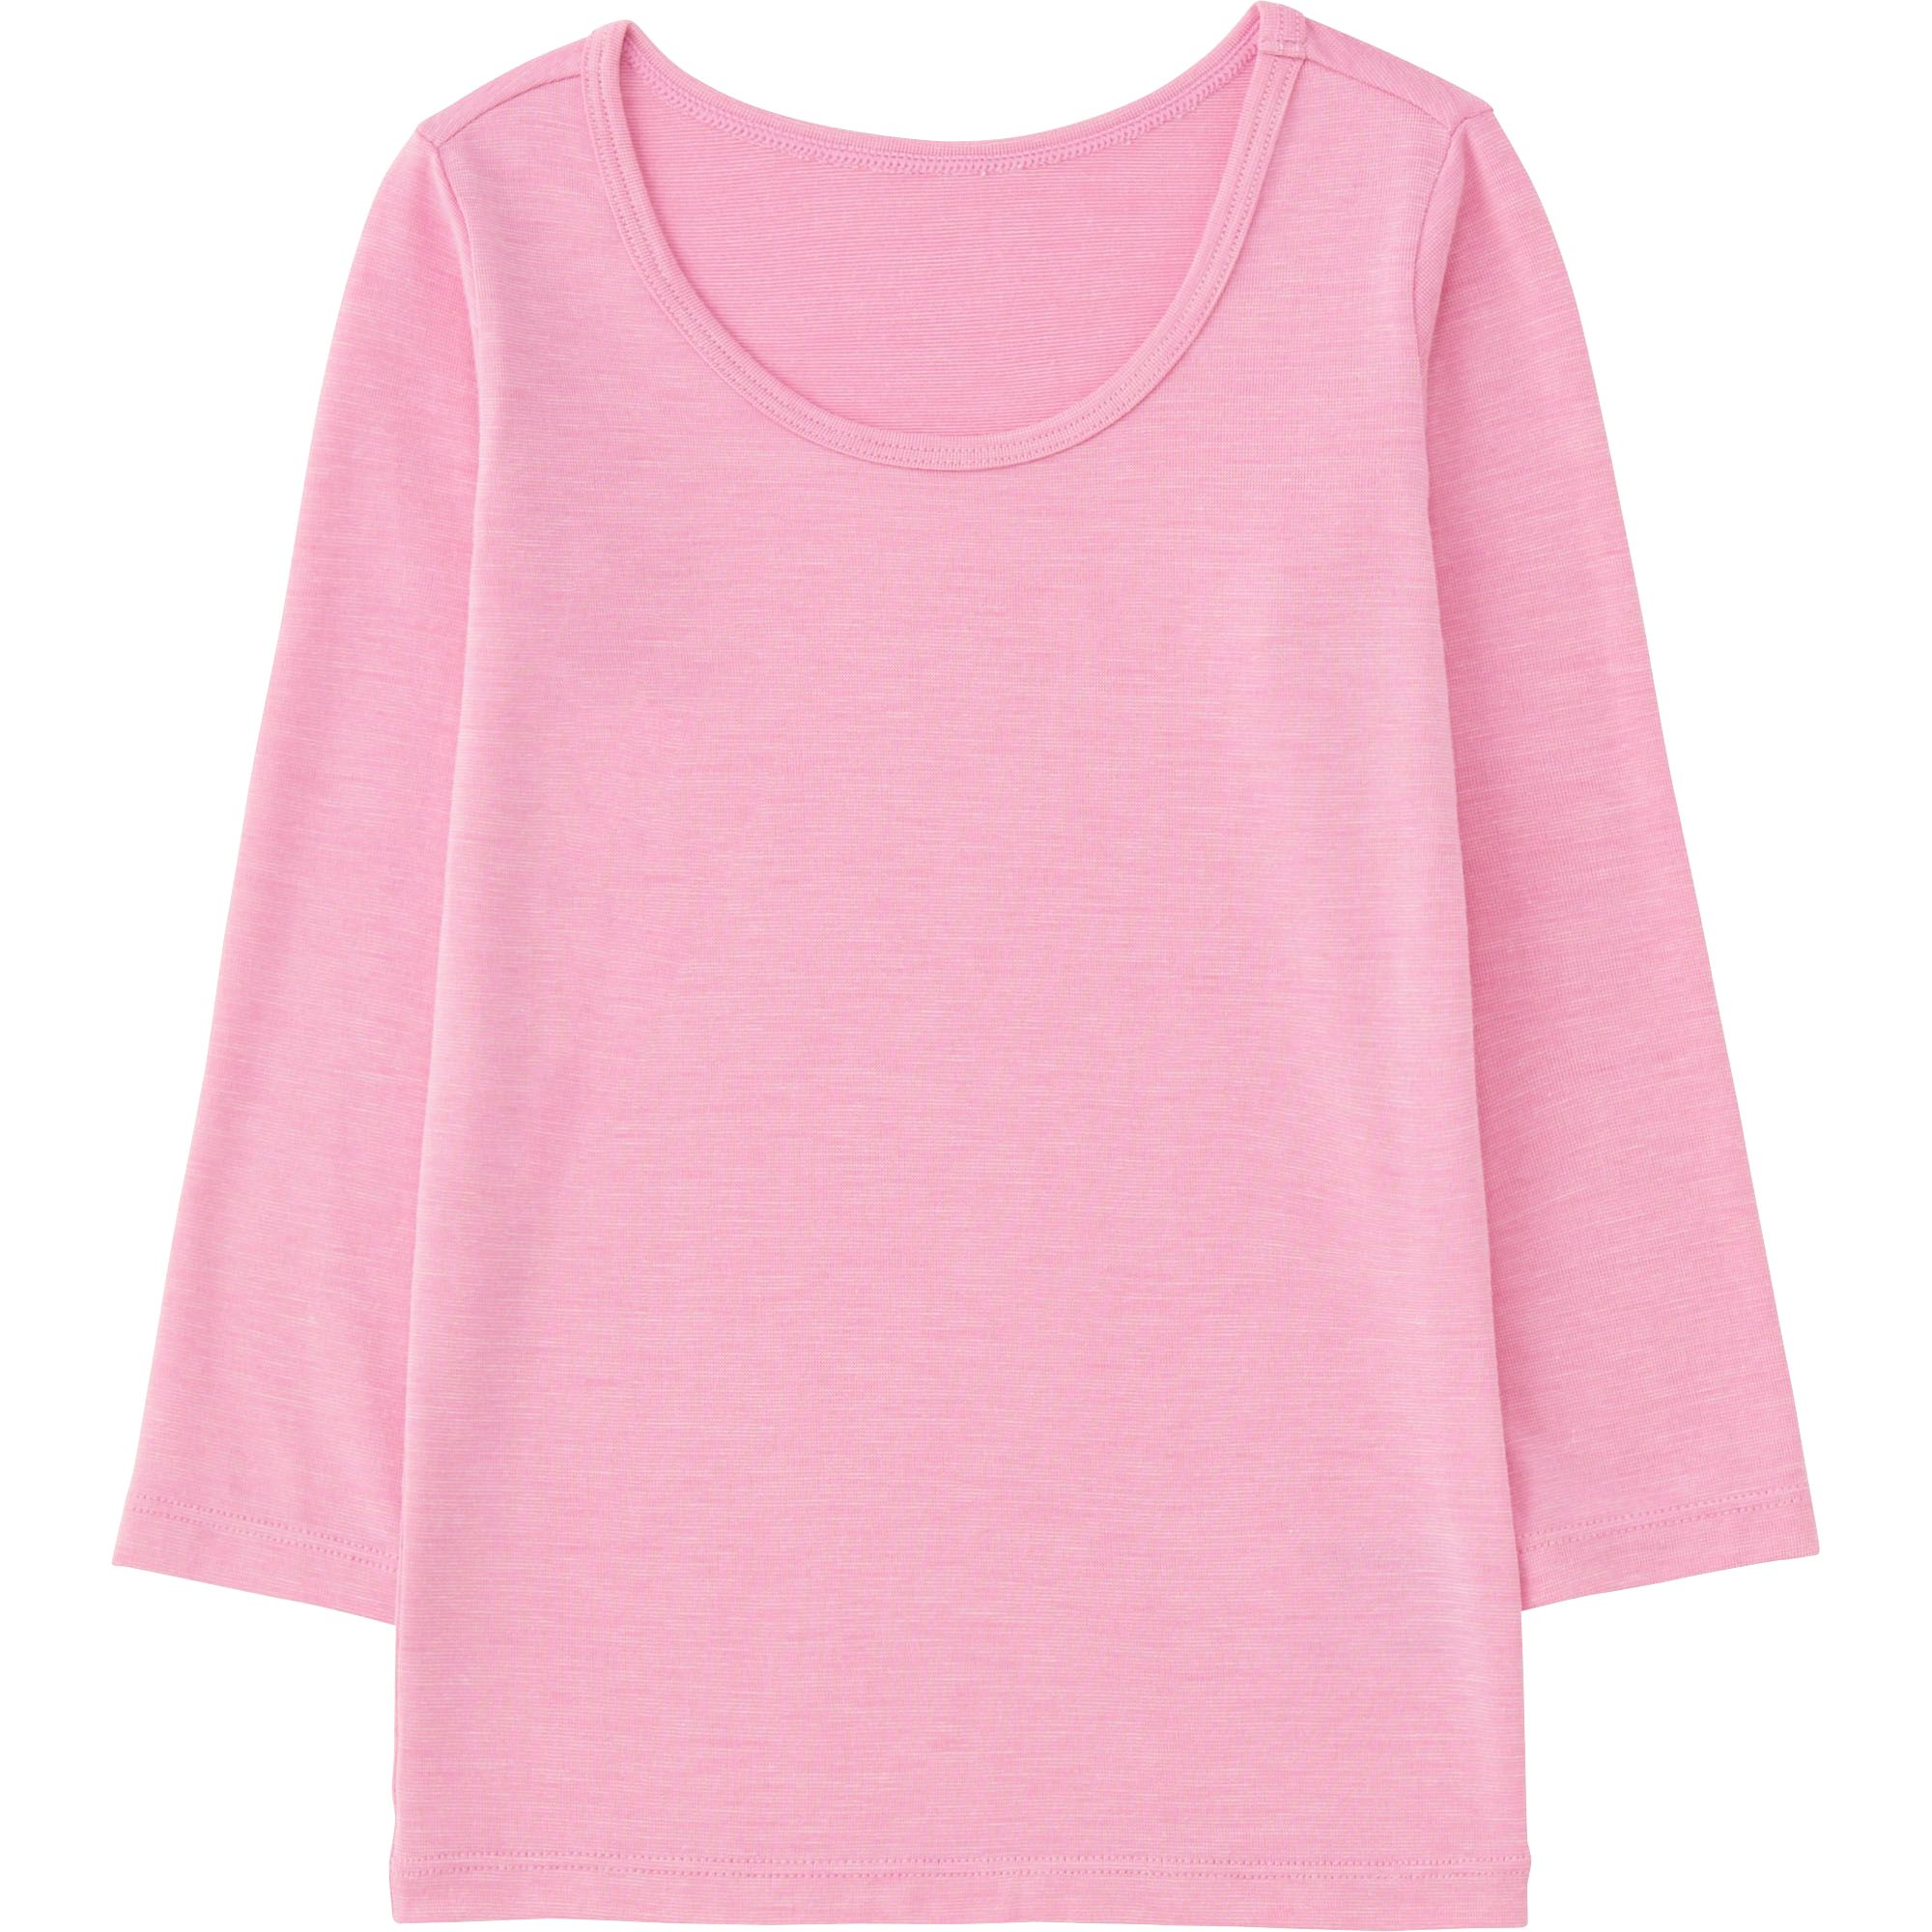 Toddler Tops, T-Shirts, Vests & Baby Dresses | UNIQLO